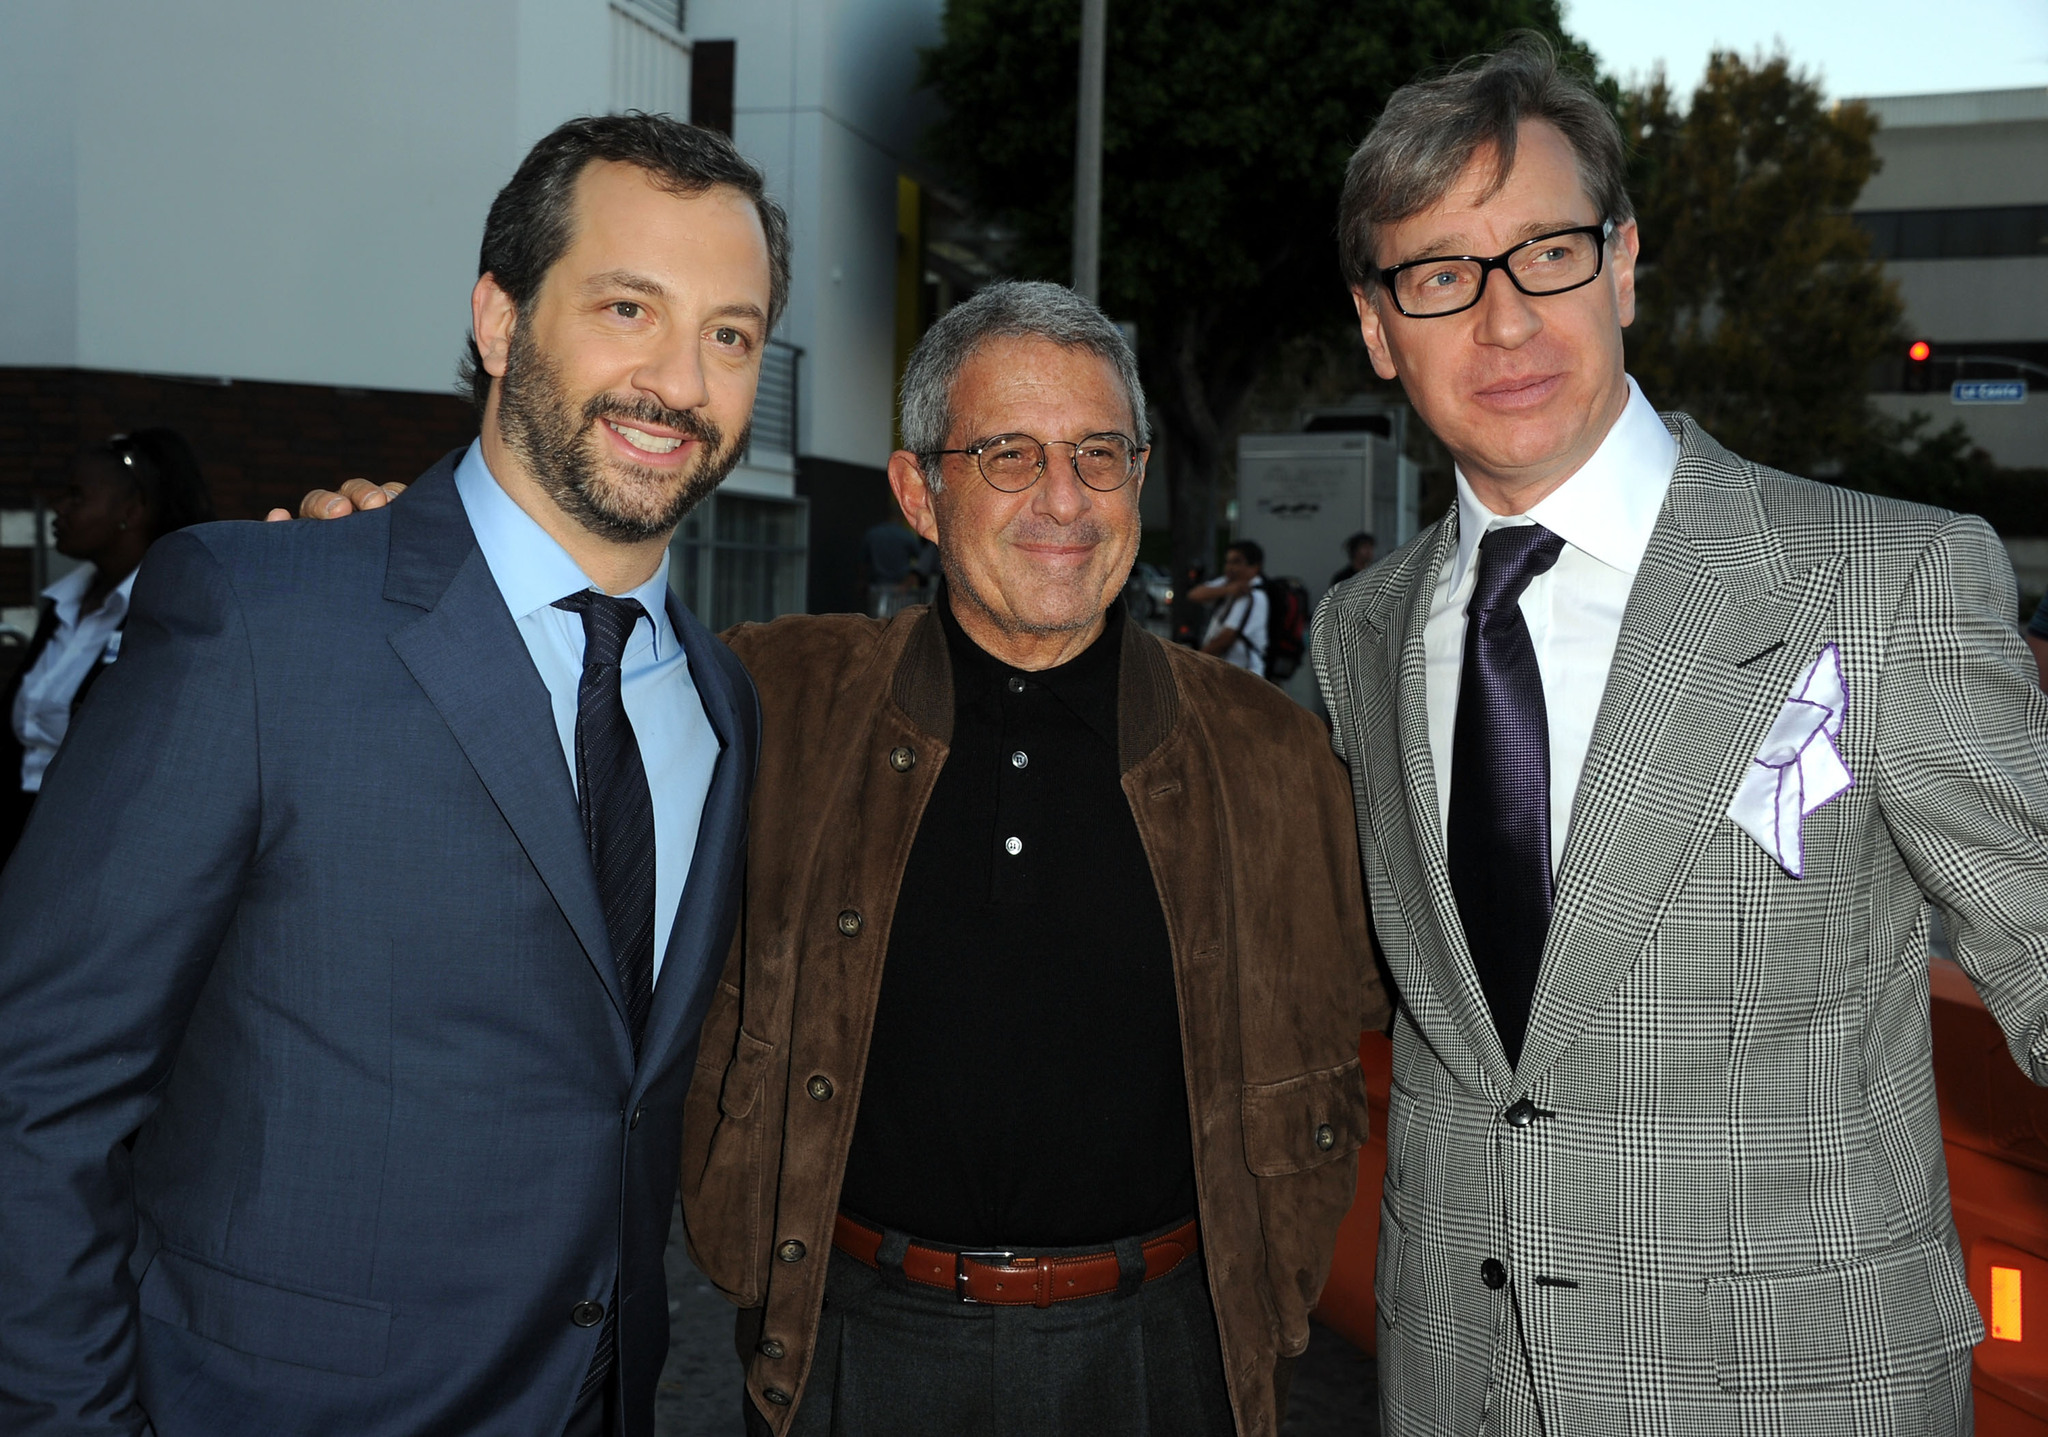 Ron Meyer, Judd Apatow and Paul Feig at event of Sunokusios pamerges (2011)